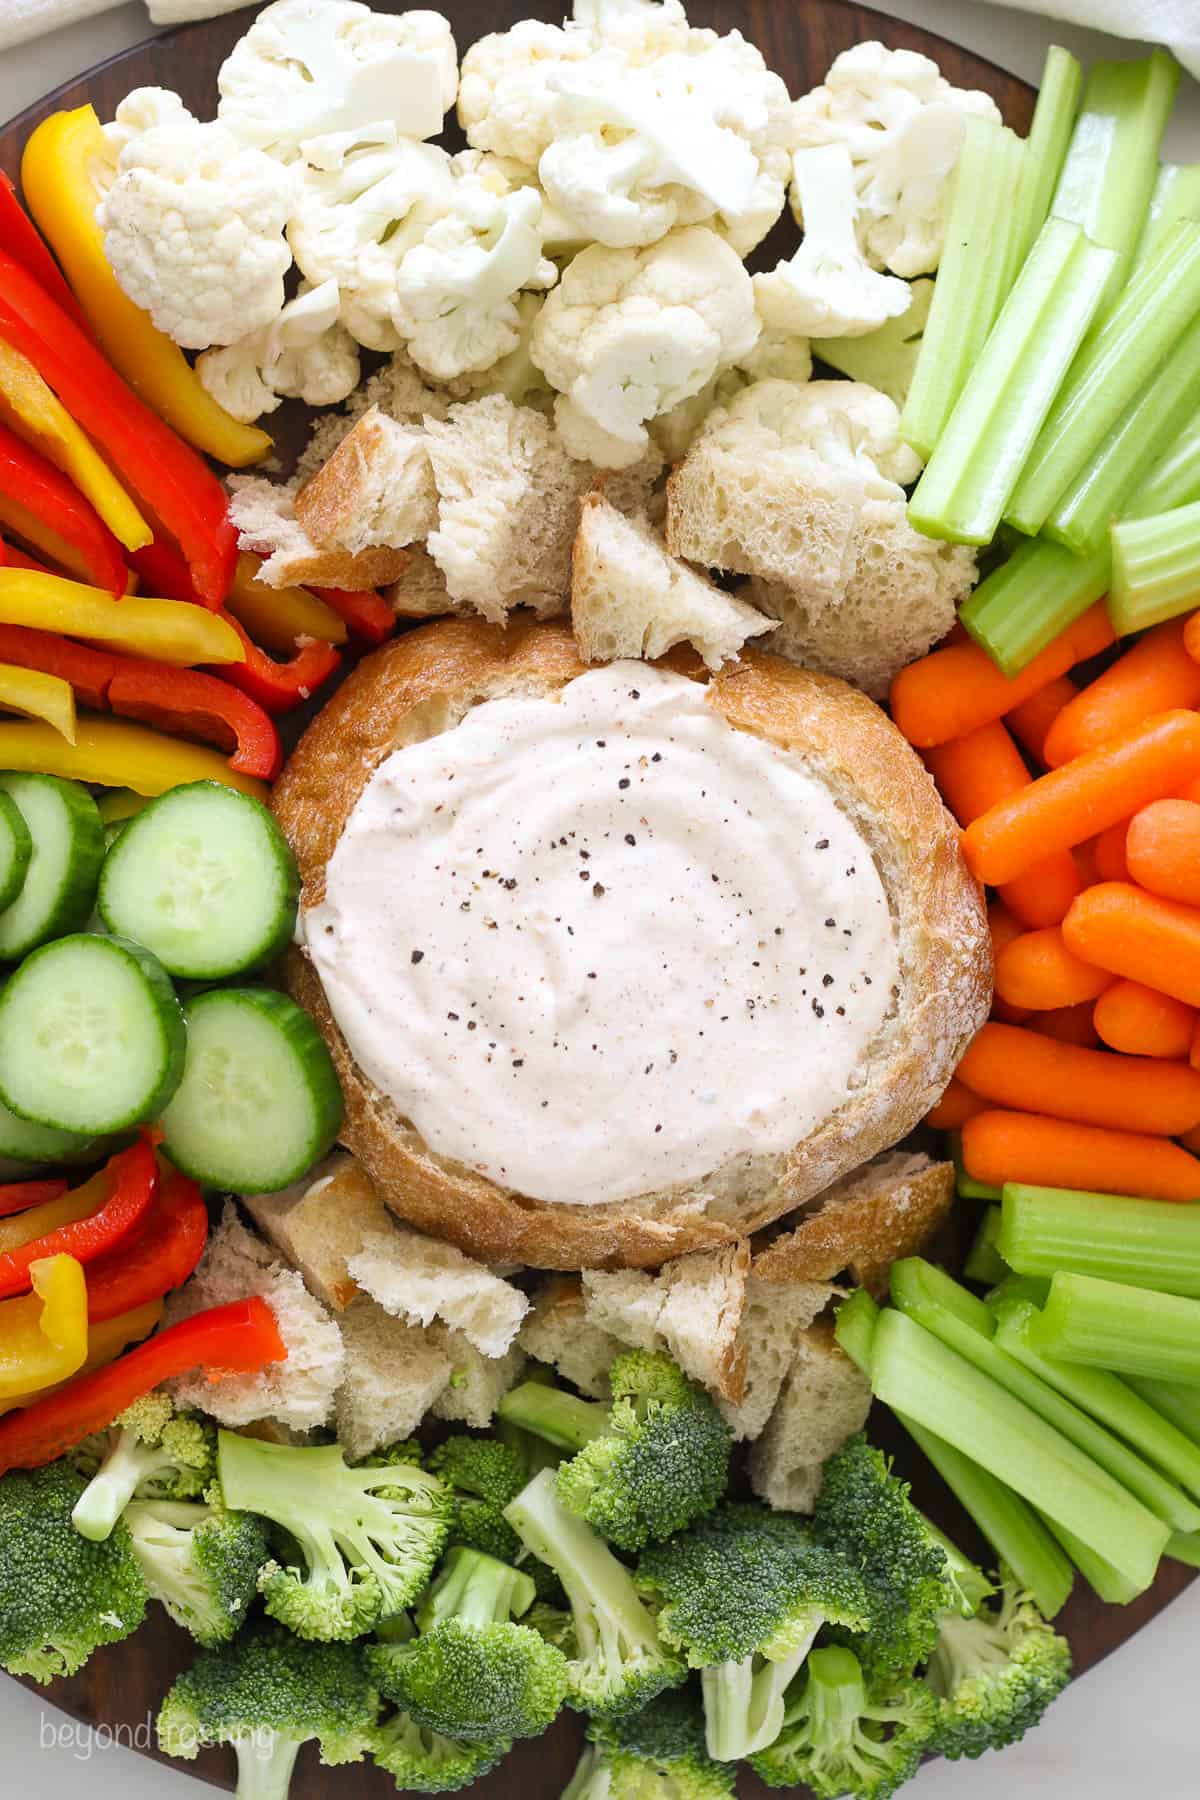 Overhead view of a veggie plate with a bread bowl of dip in the center